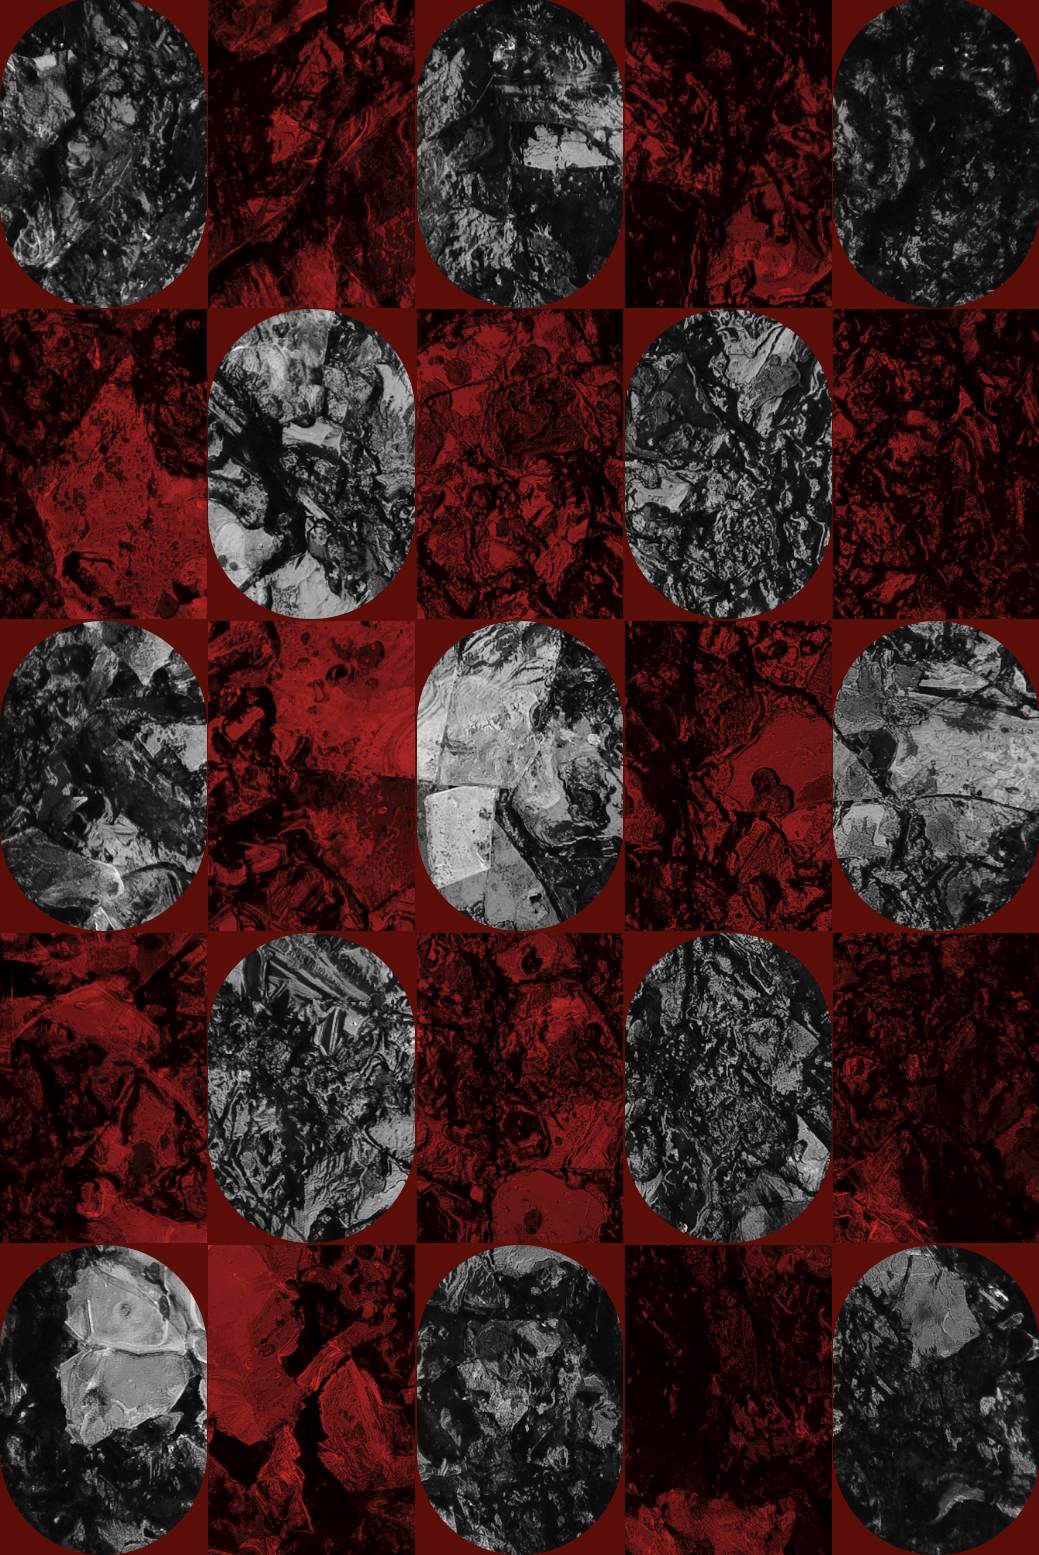 Red and black art in a checkered pattern that forms a larger photo